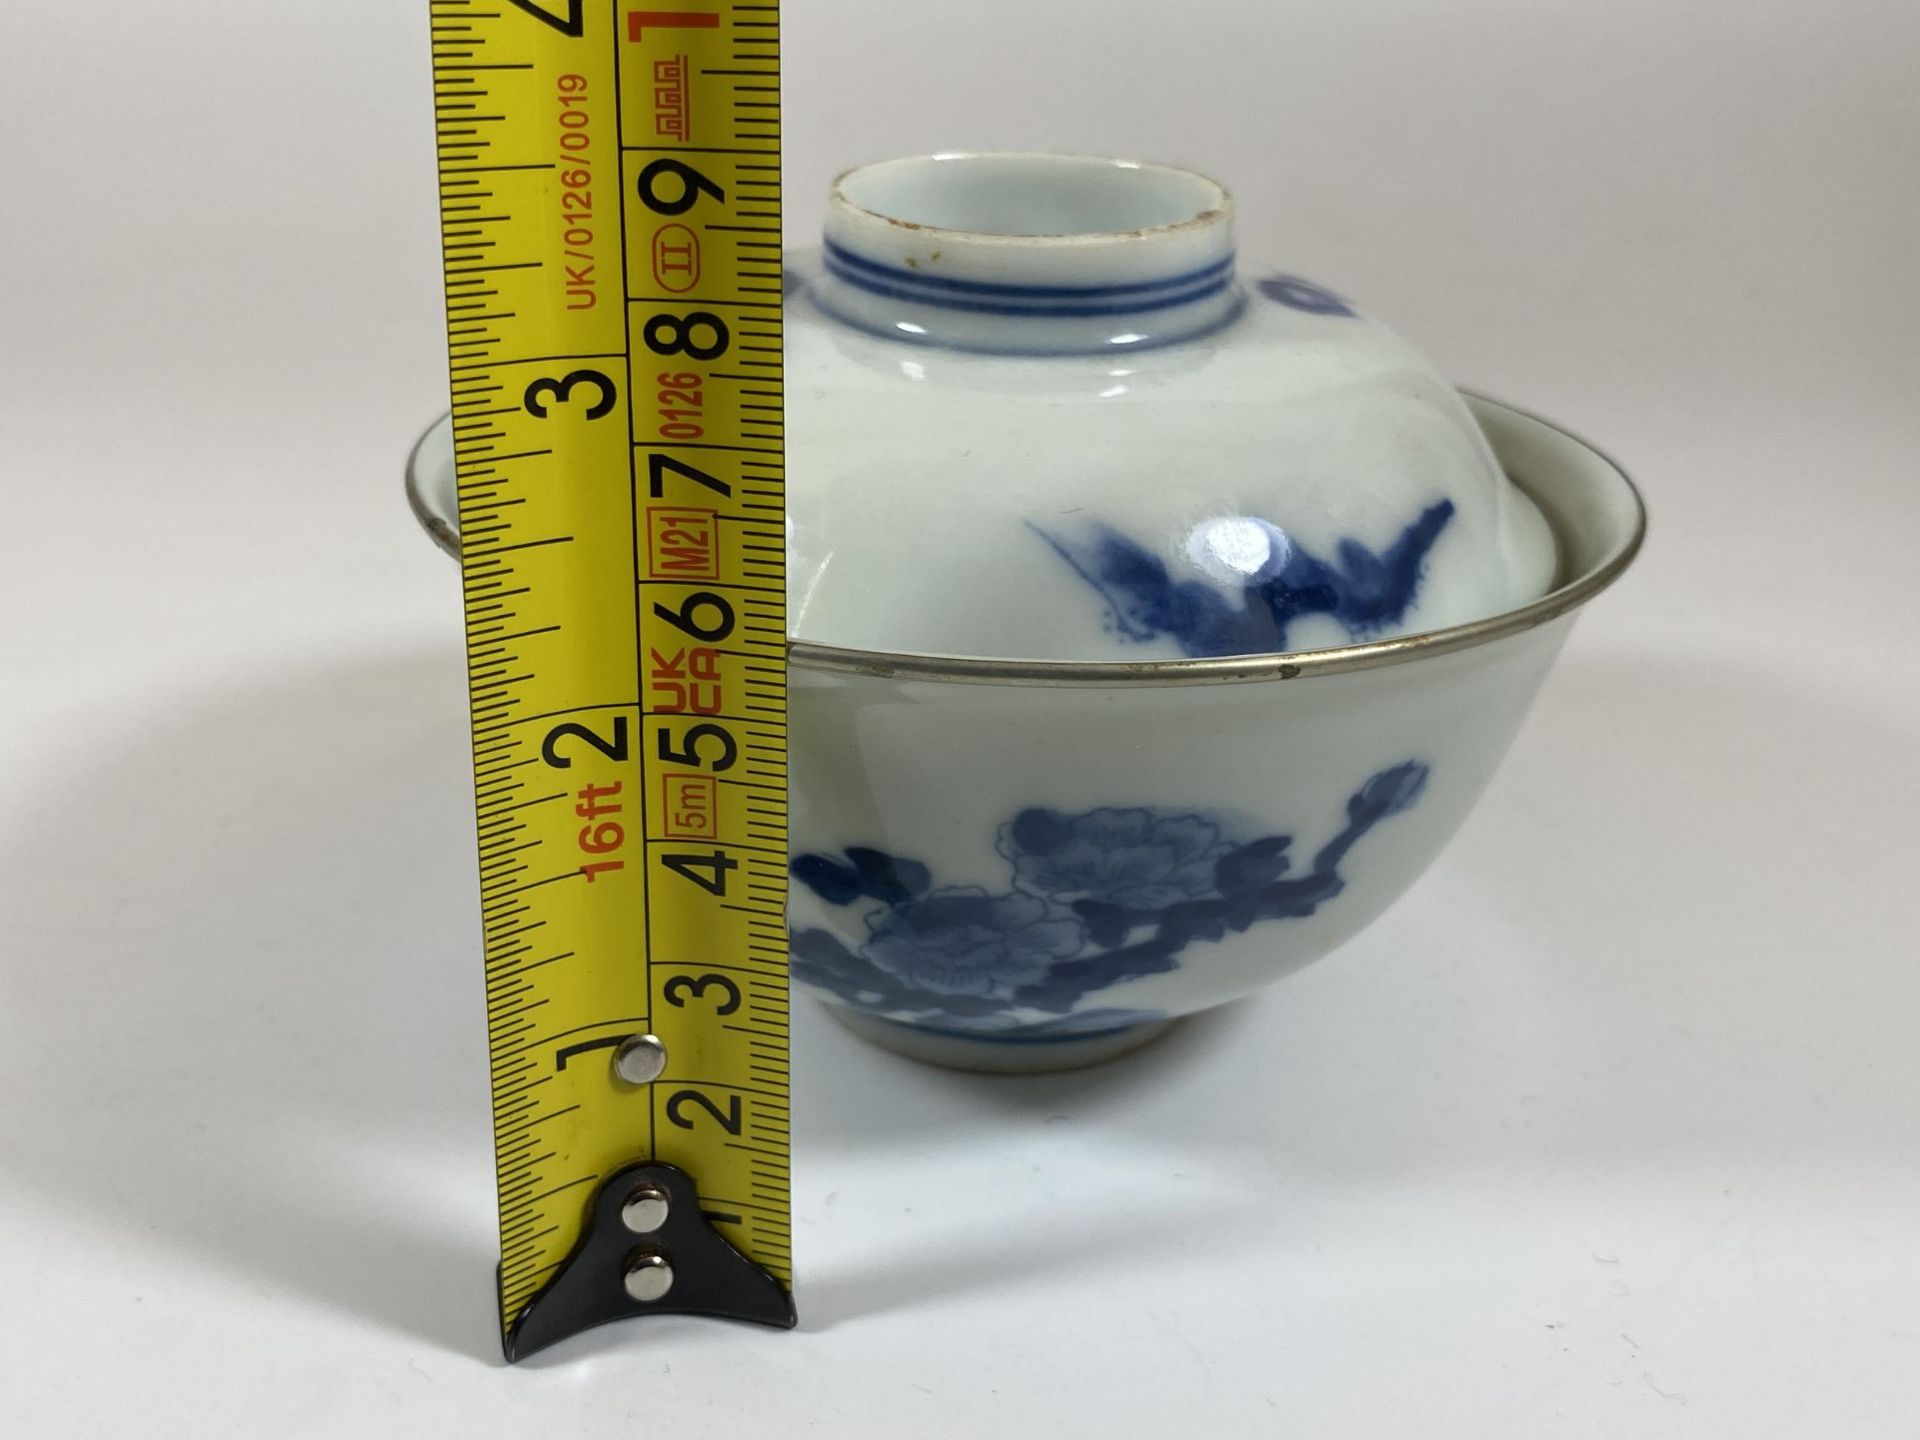 A CHINESE BLUE AND WHITE PORCELAIN TEA BOWL WITH SAUCER LID, HEIGHT 9CM - Image 4 of 4